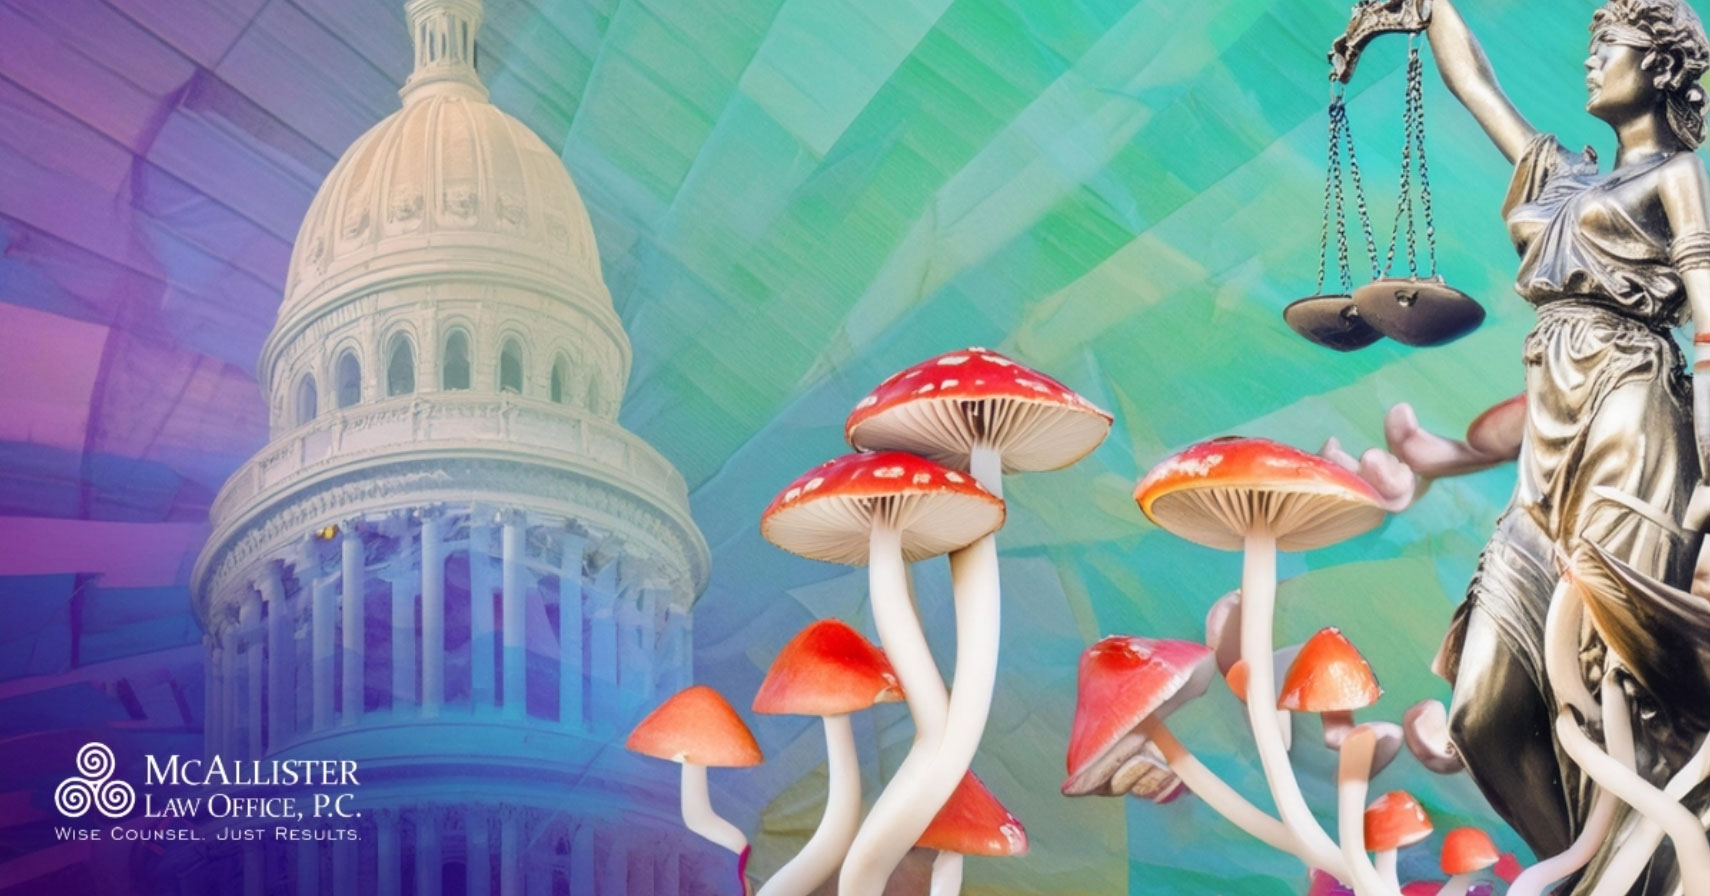 Emerging Trends In Psychedelic Laws: Implications for Practitioners